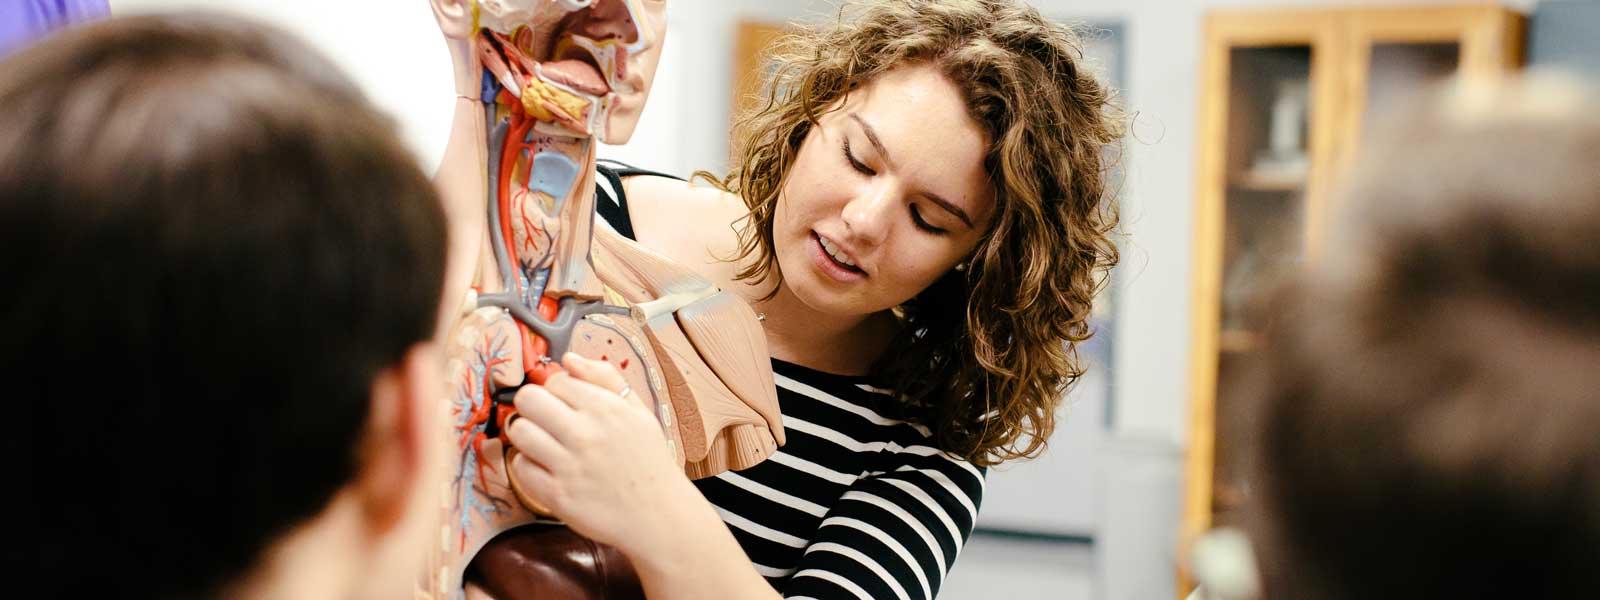 female student uses human body anatomy model in biology class discussion